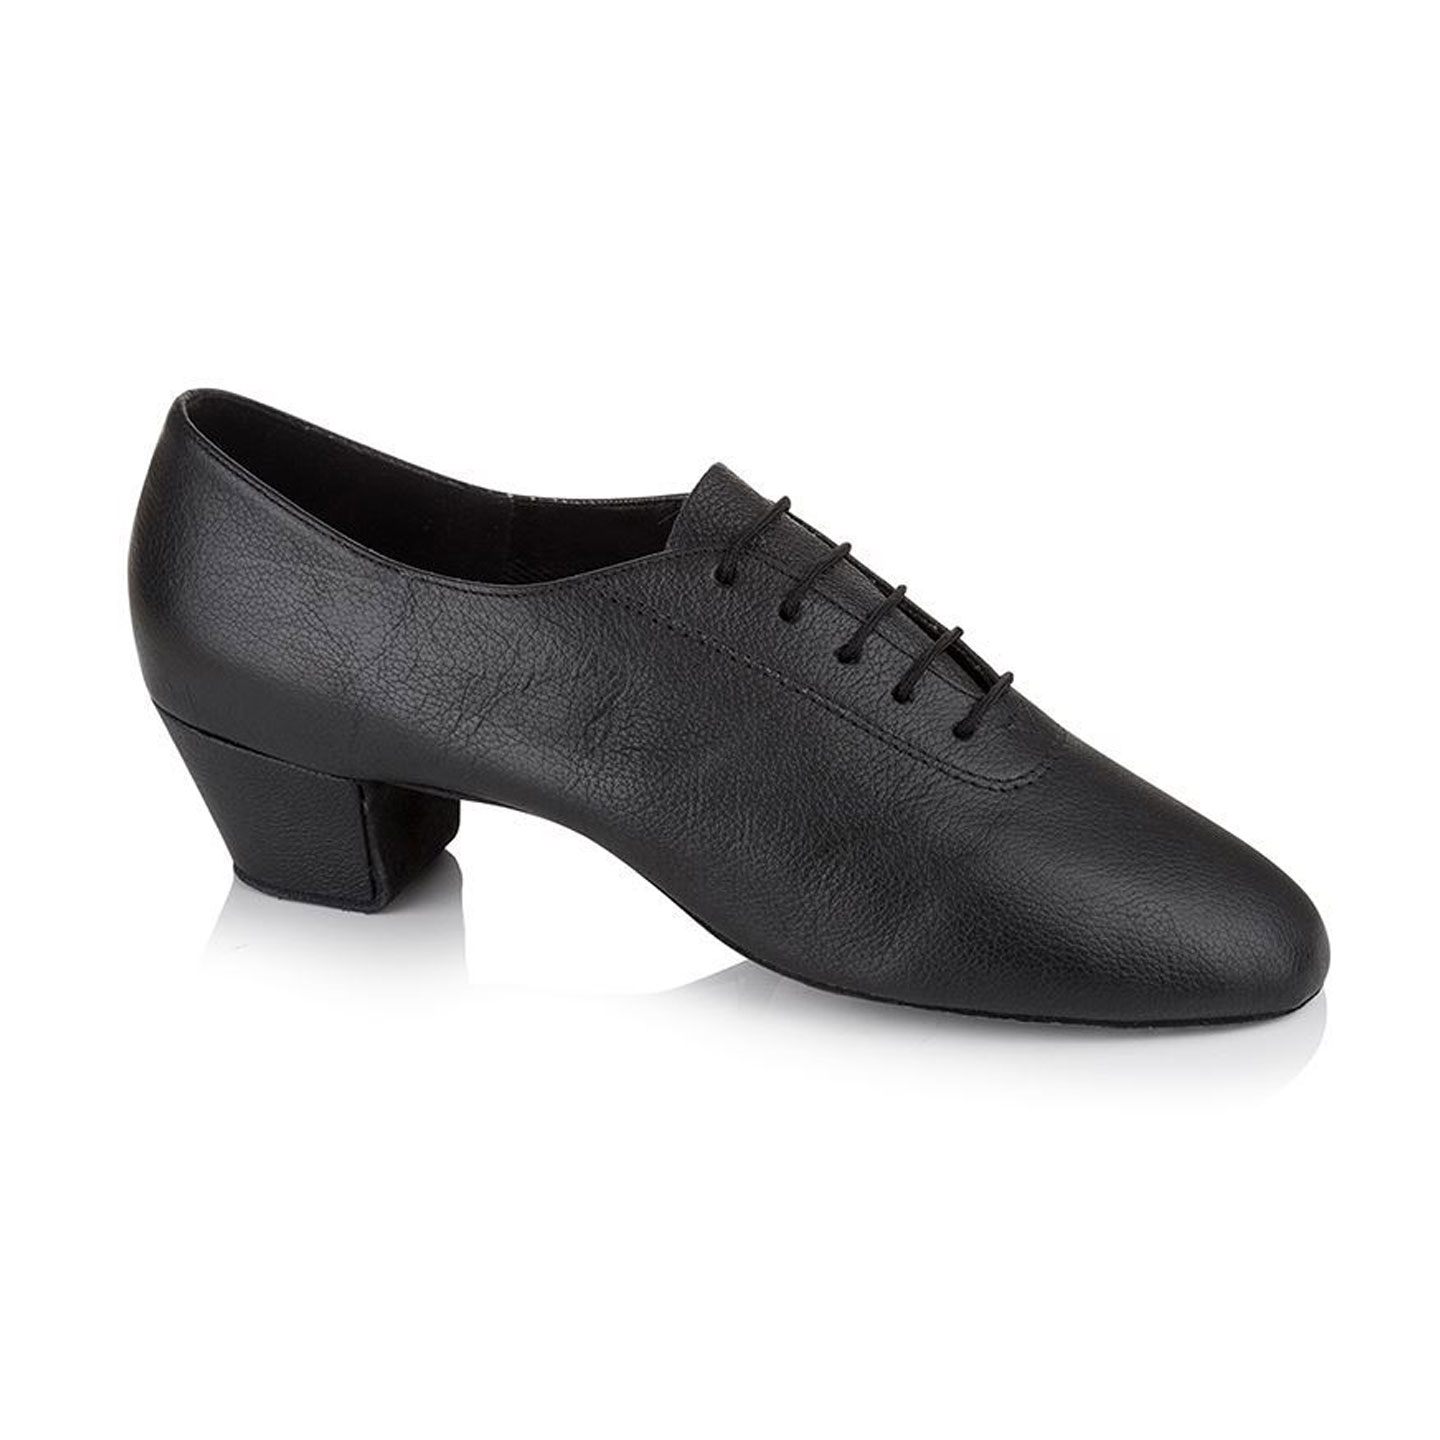 Freed Professional Dance Shoes